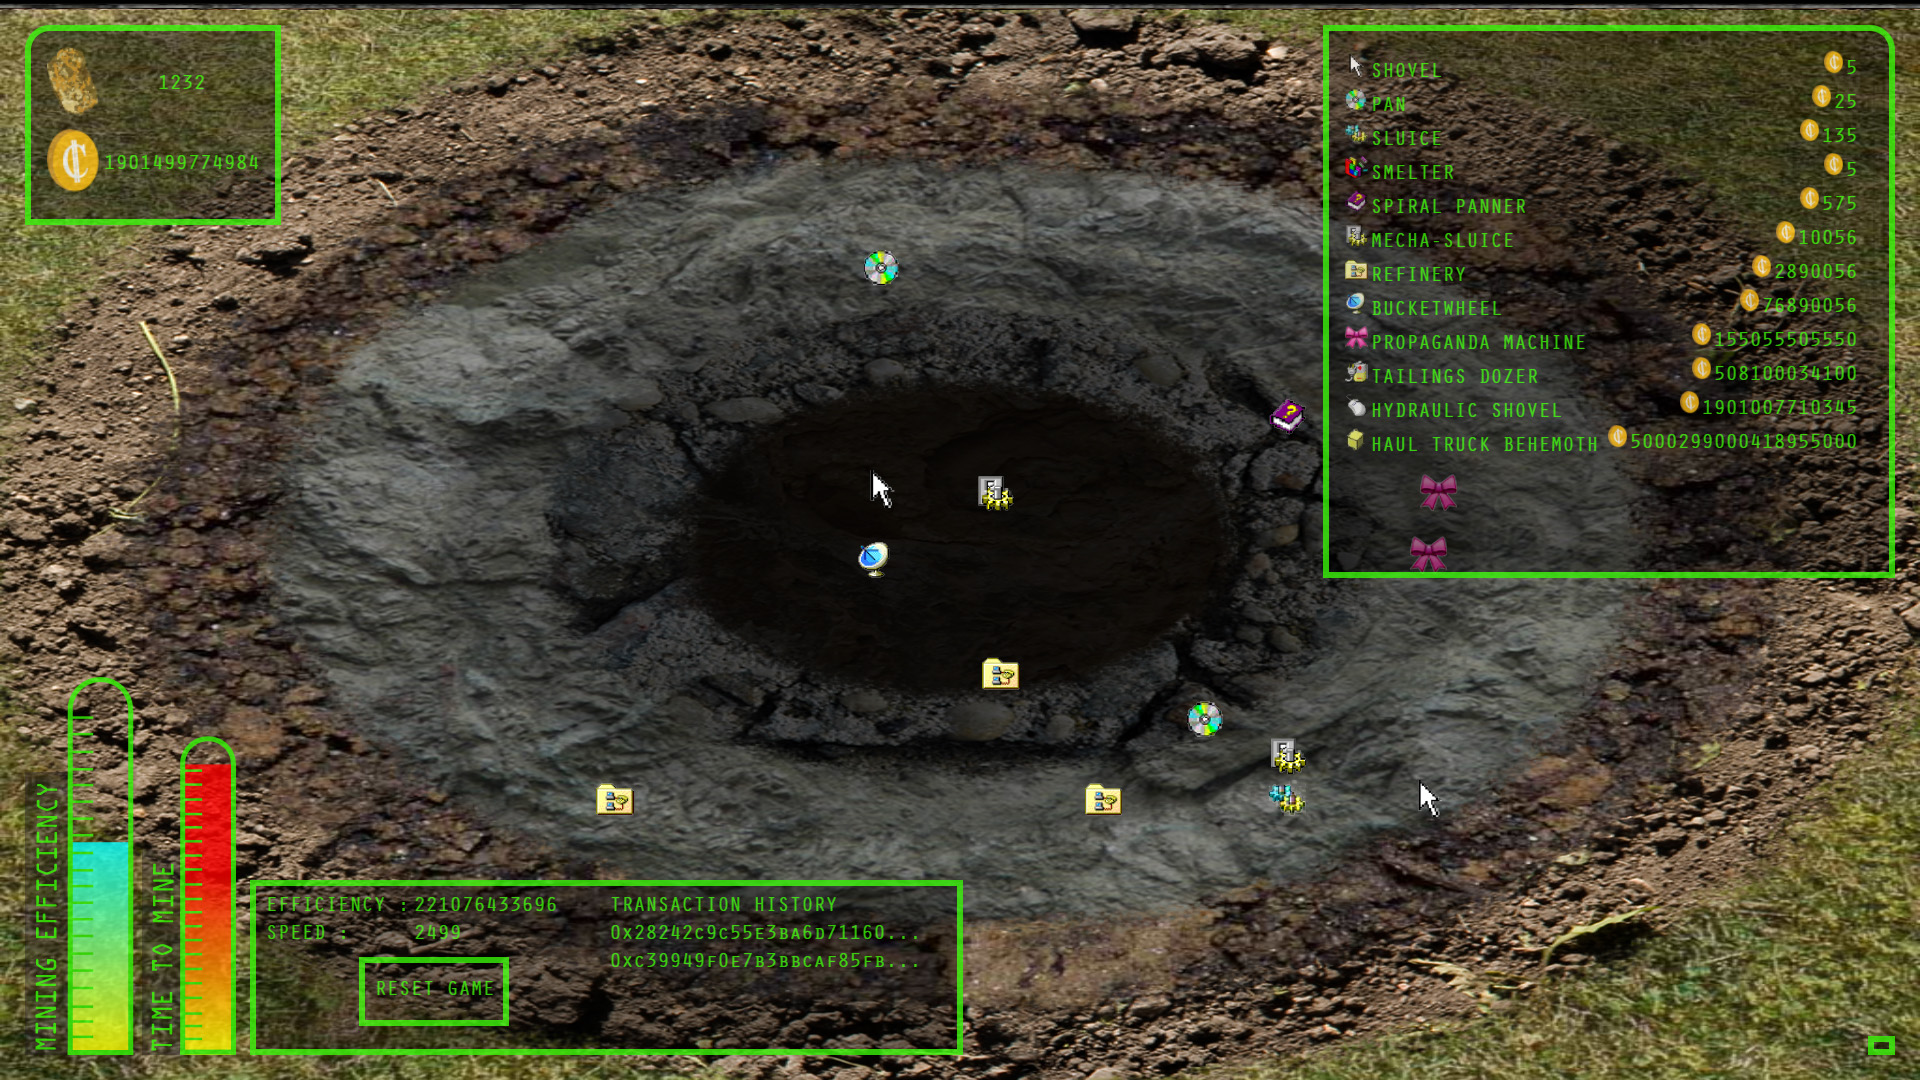 Gameplay from ClickMine by Sarah Friend, the hole is larger and deeper